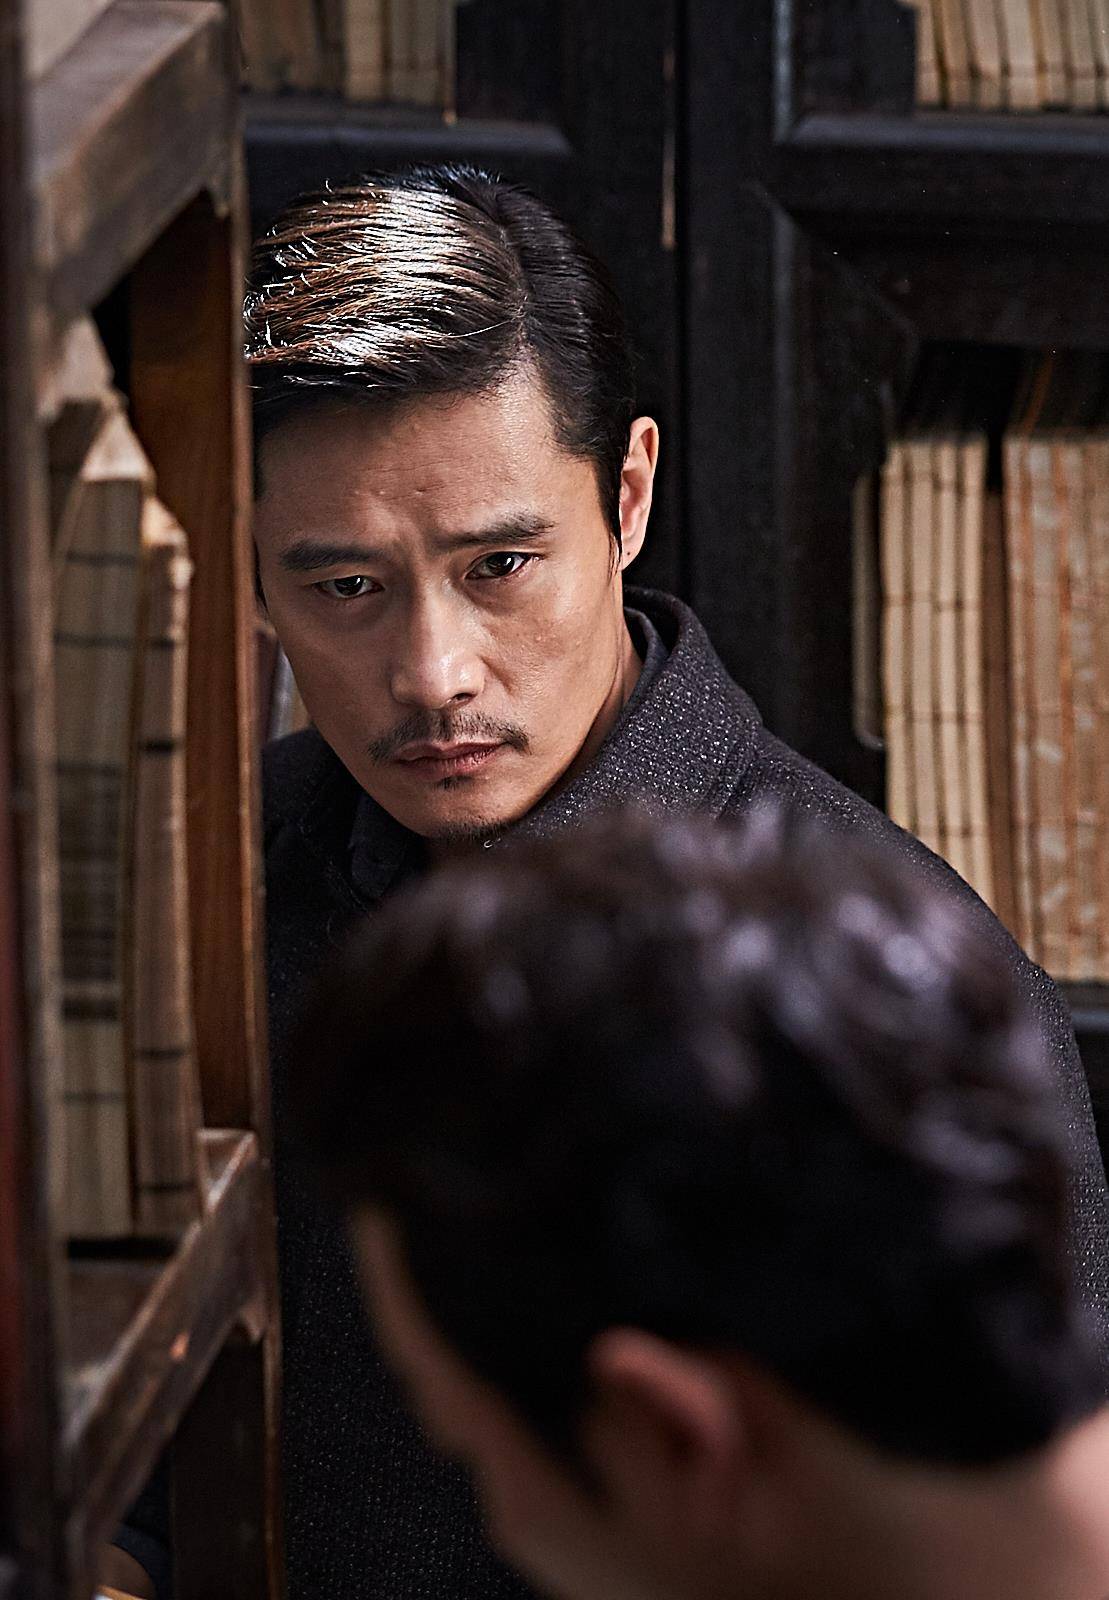 [Photo] Added new Lee Byung-hun still for the Korean movie "The Age of